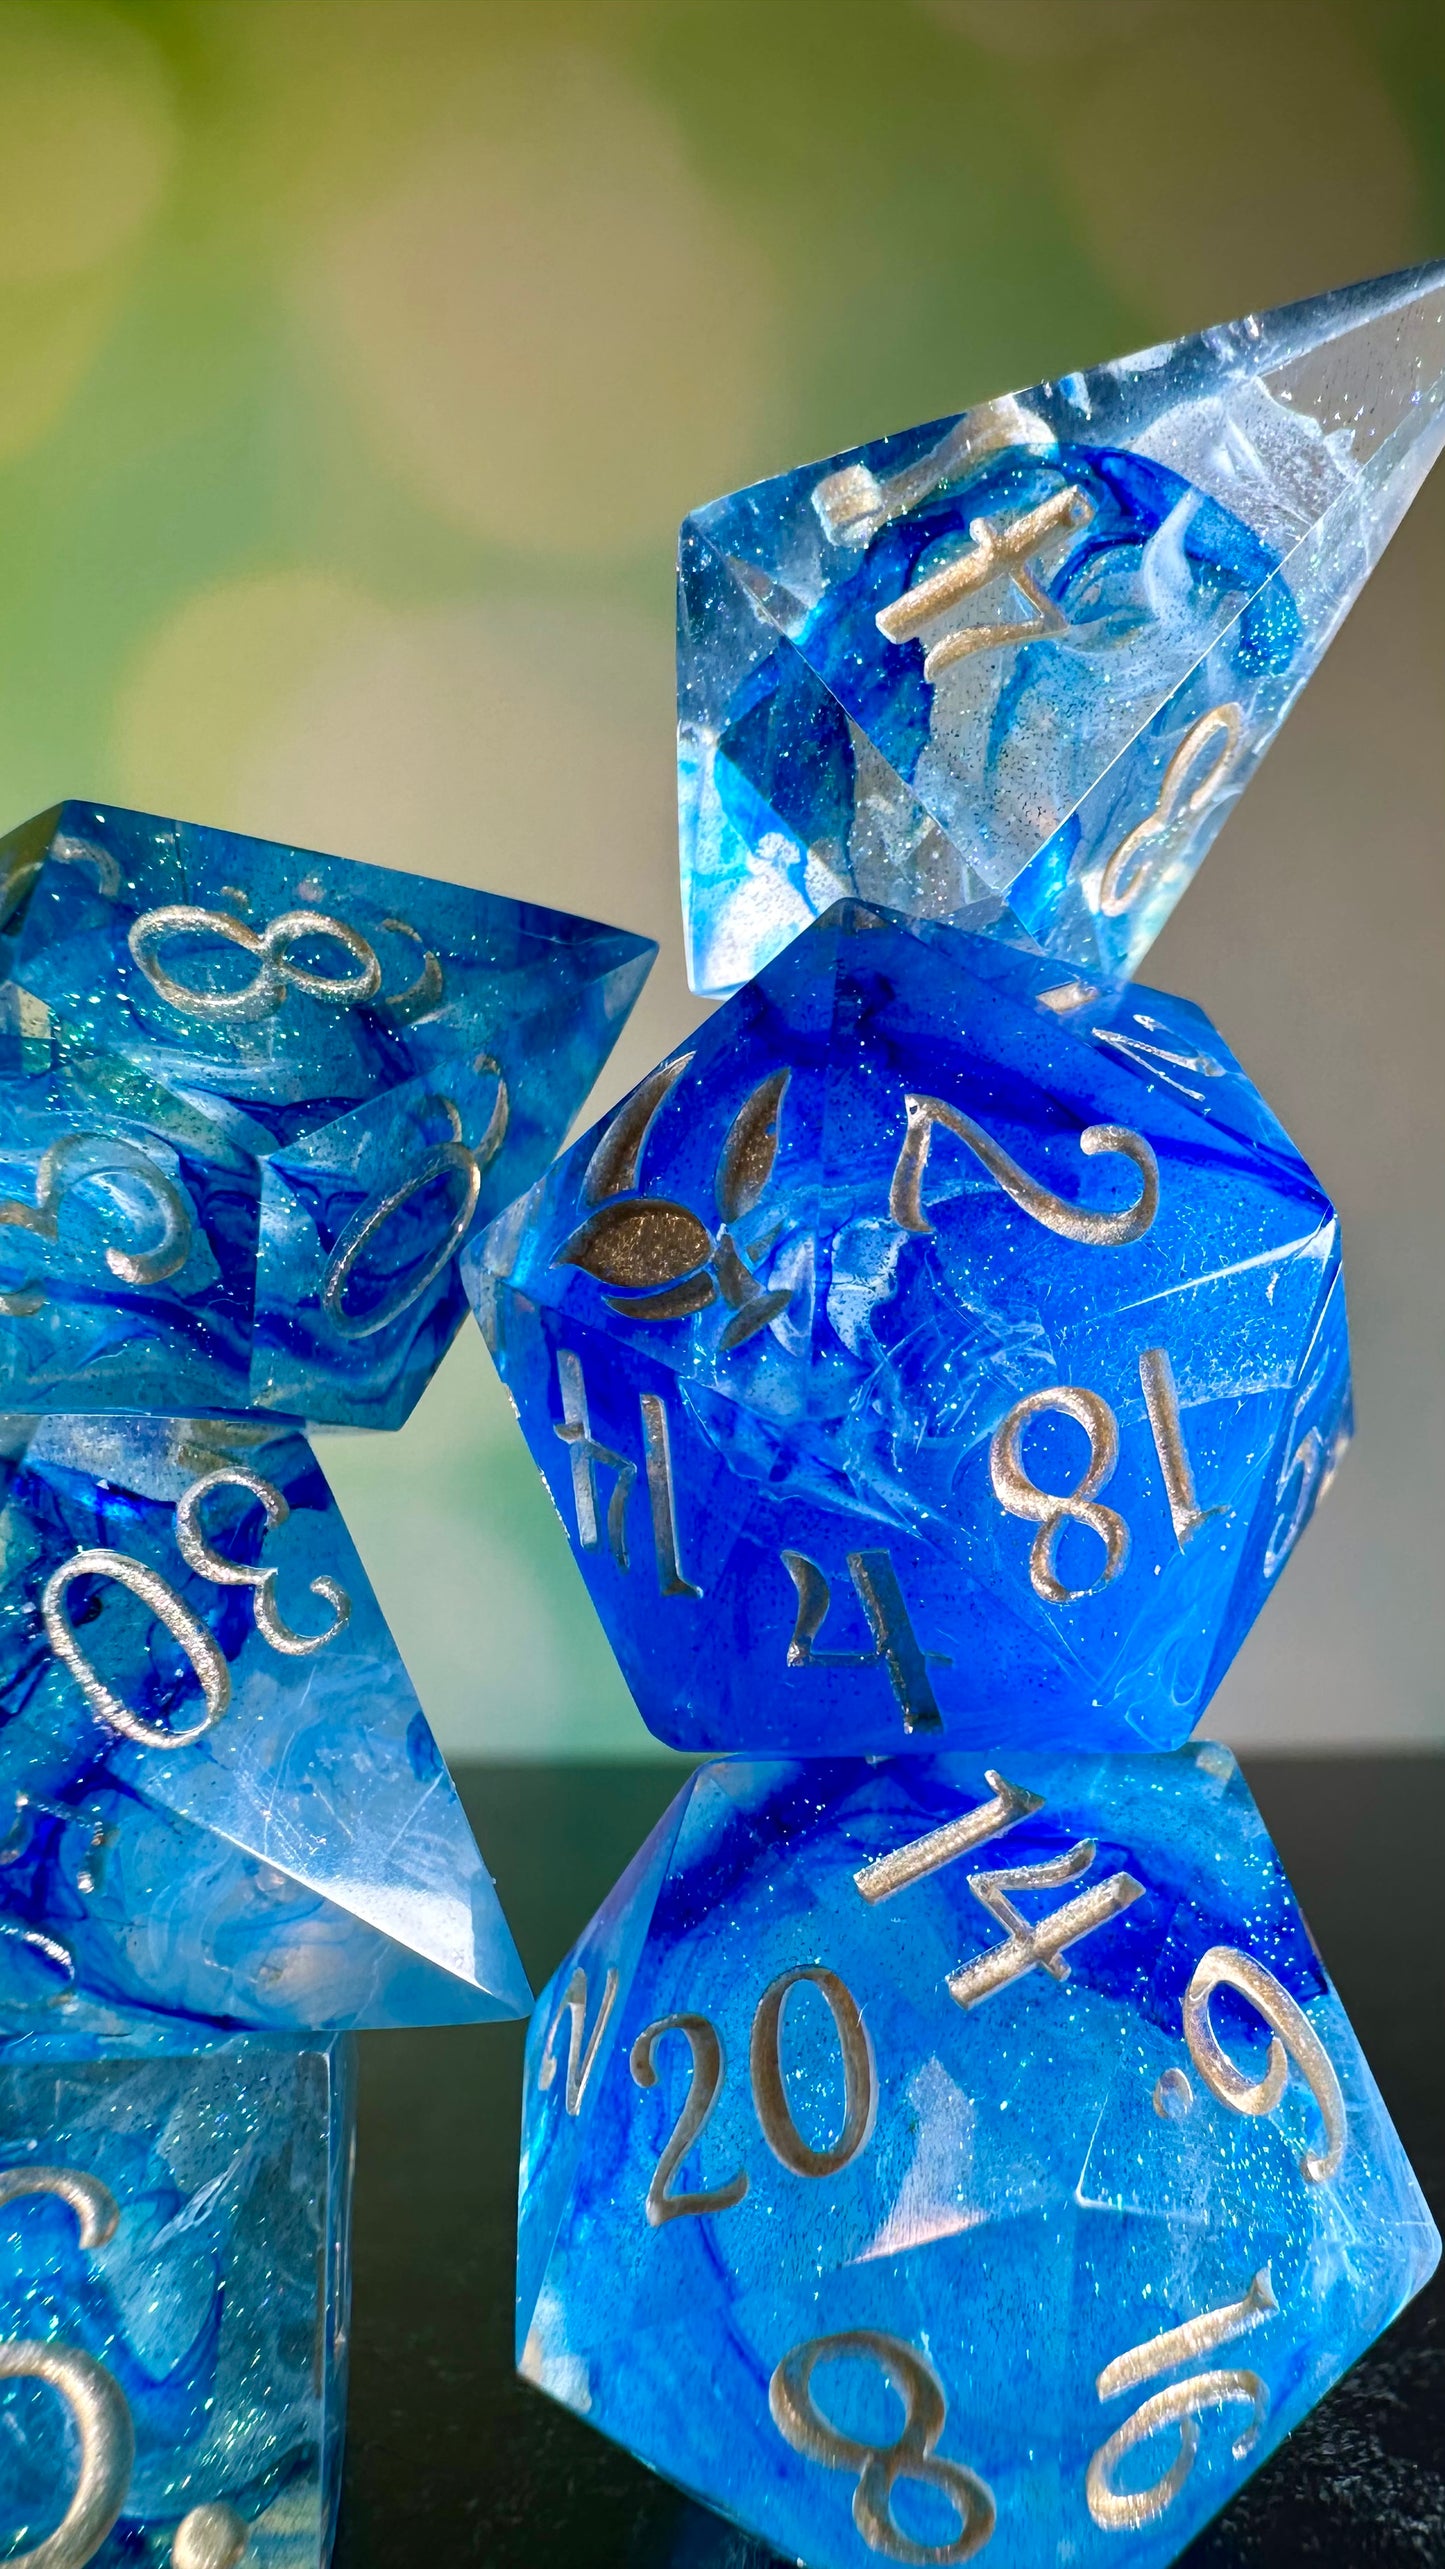 Weather Mage- 8 piece polyhedral dice set